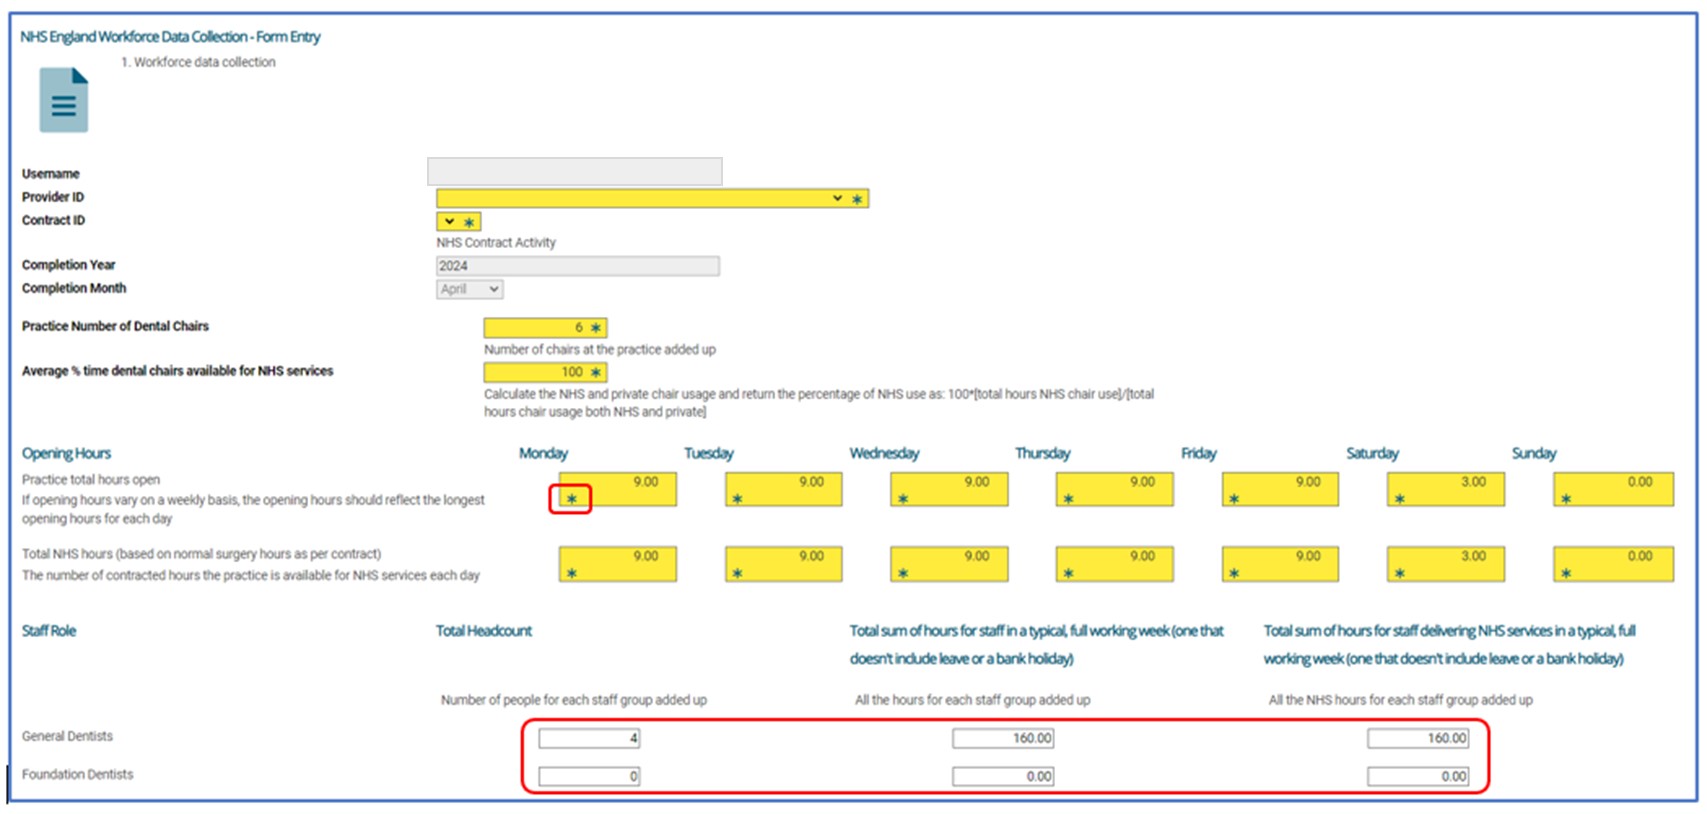 NHSE Workforce Data Collection - Form Entry screen highlighting example data entry